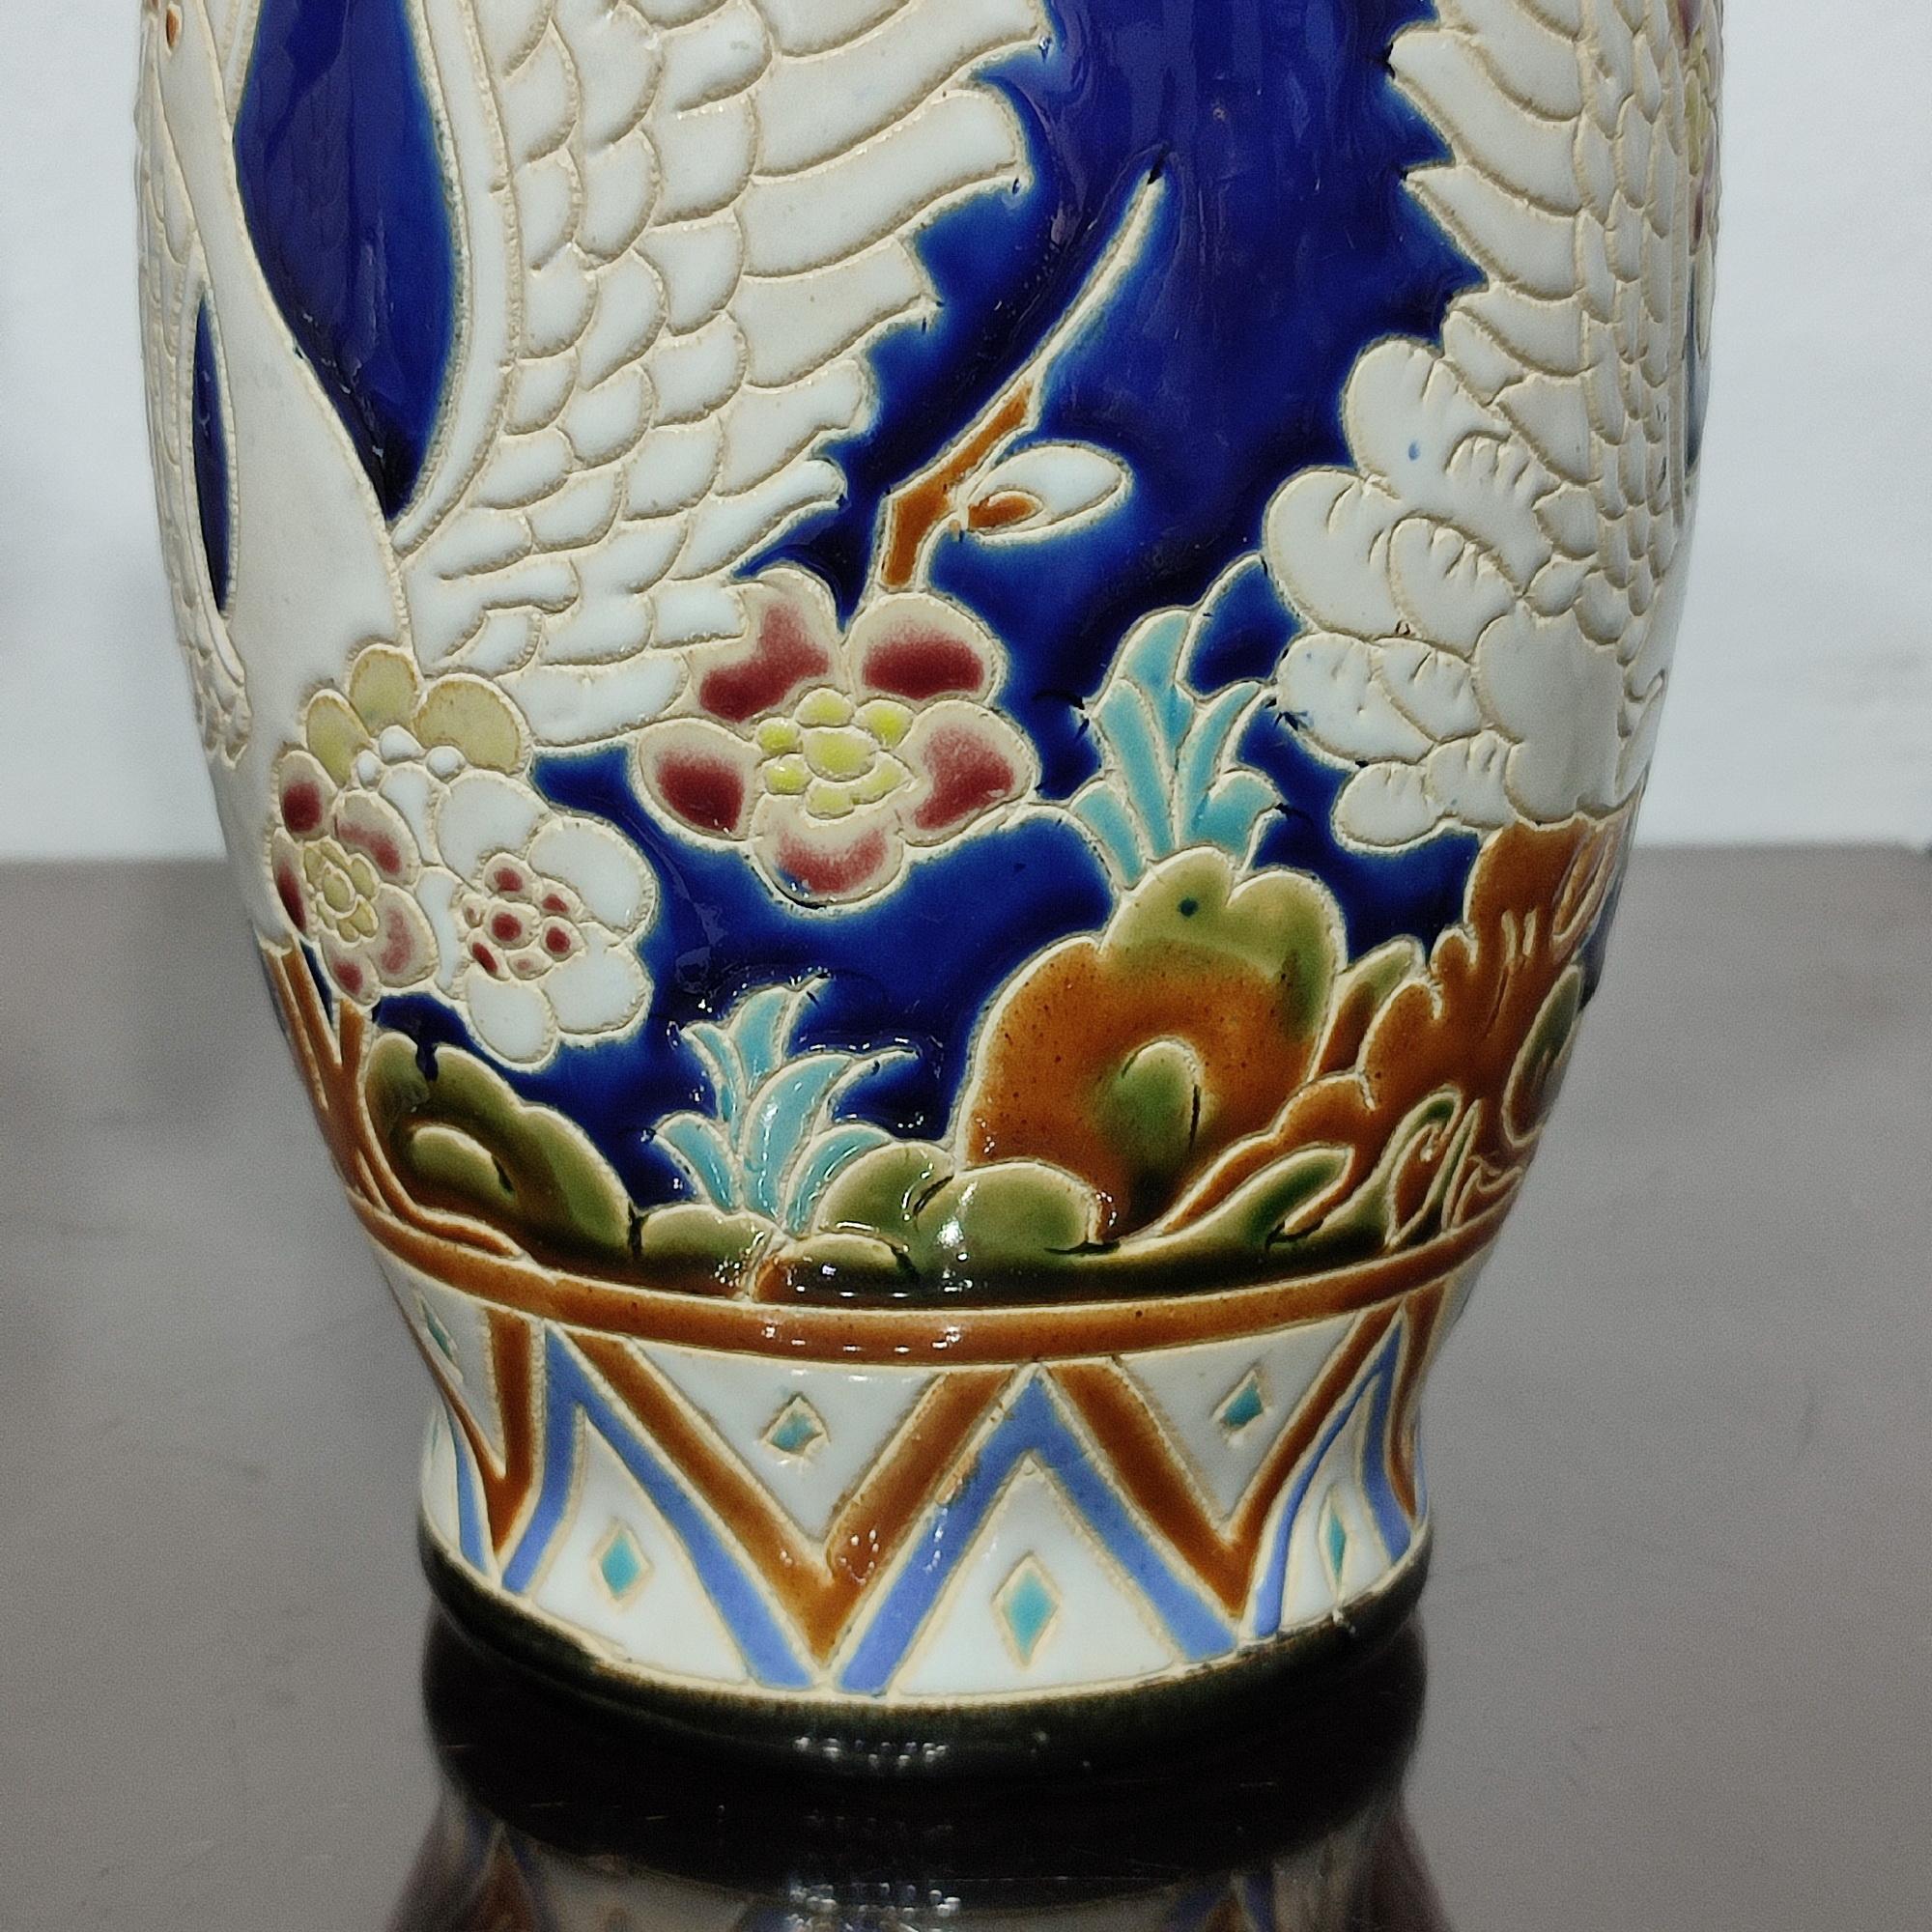 Pair of Ceramic Vases with Wonderful Flying Swans and Cherry Flowers Decor 2